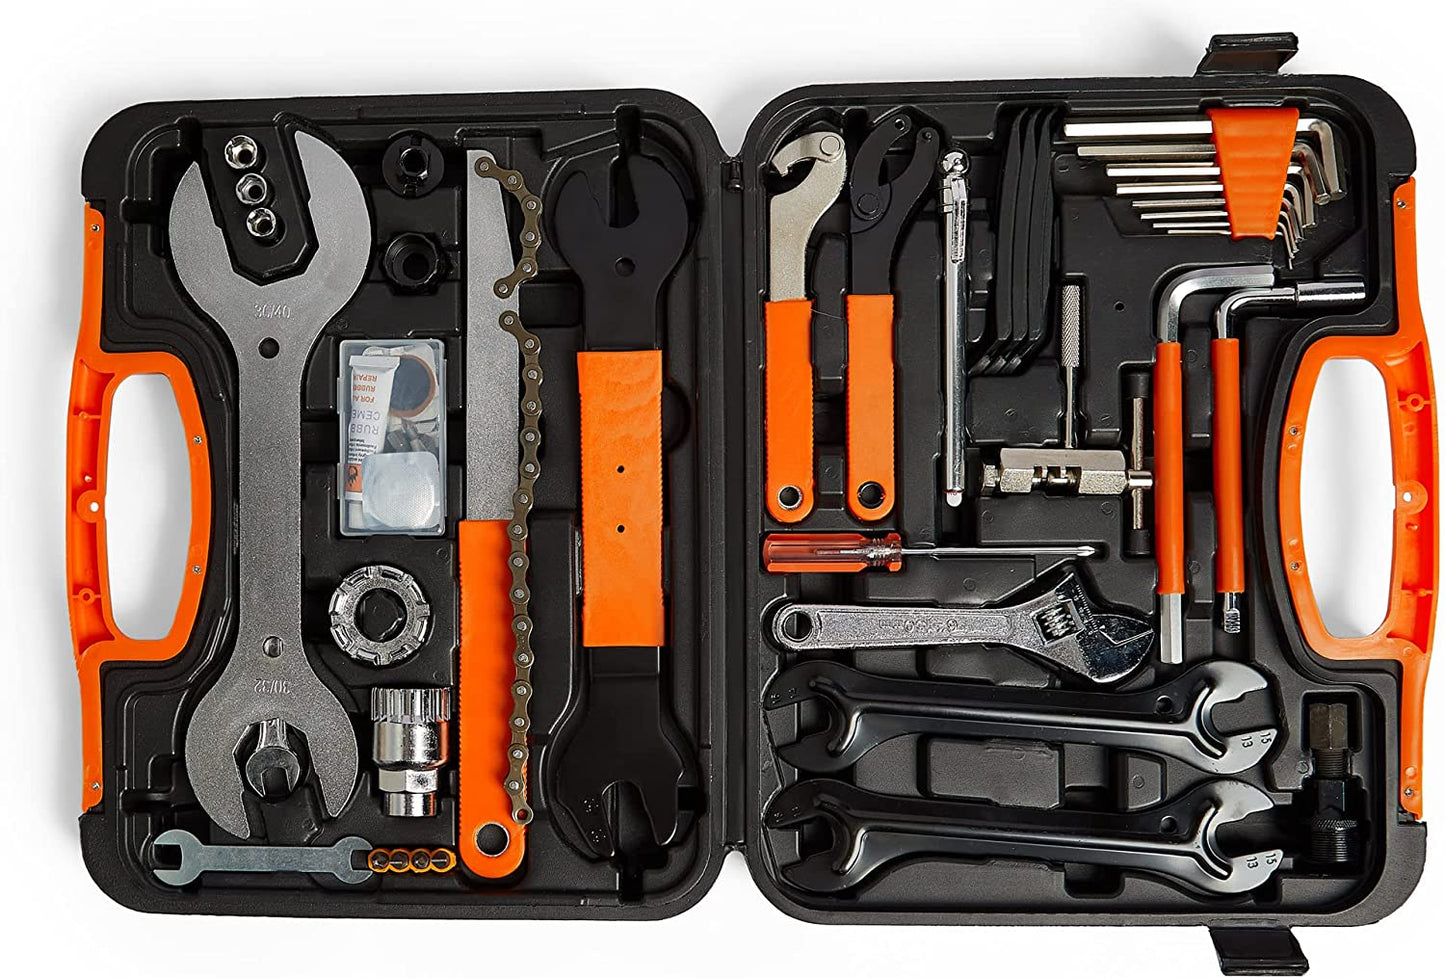 Bike Tool Kit 35 Piece - Portable Bike Repair Kit Tool Box for Road, Electric and Mountain Bikes with Carry Case